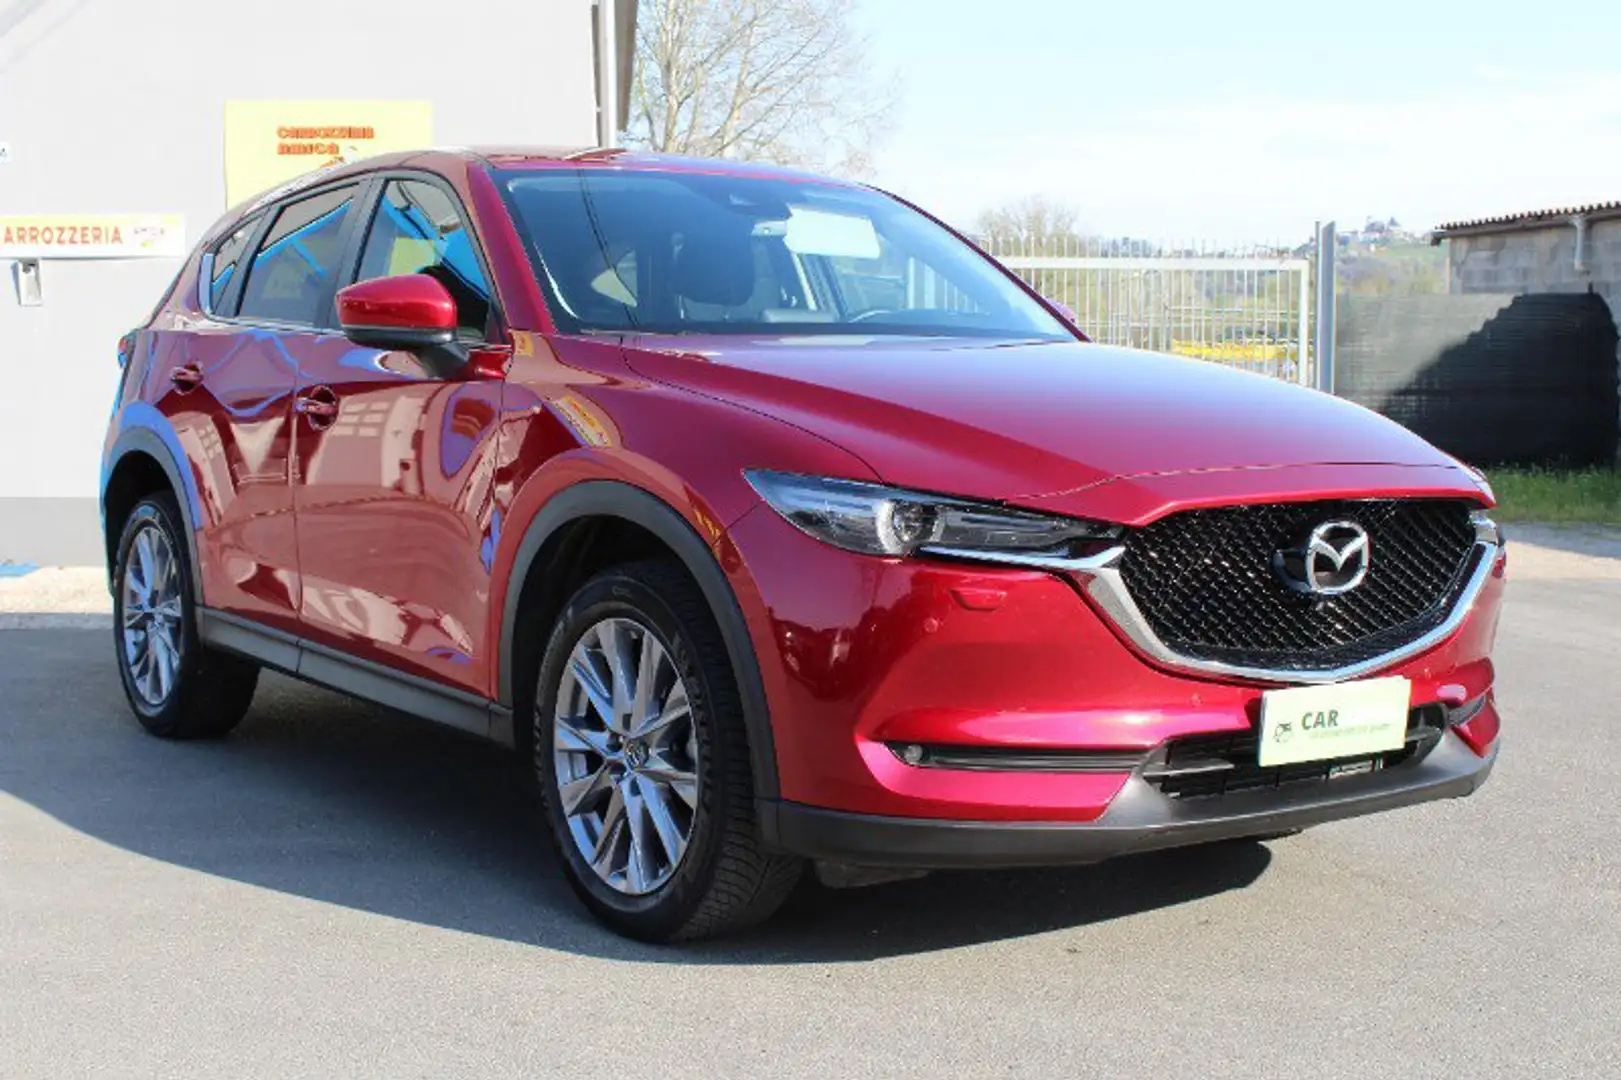 Mazda CX-5 2.2L Skyactiv-D 150CV 2WD Auto Exceed - CRUISE P Rood - 2